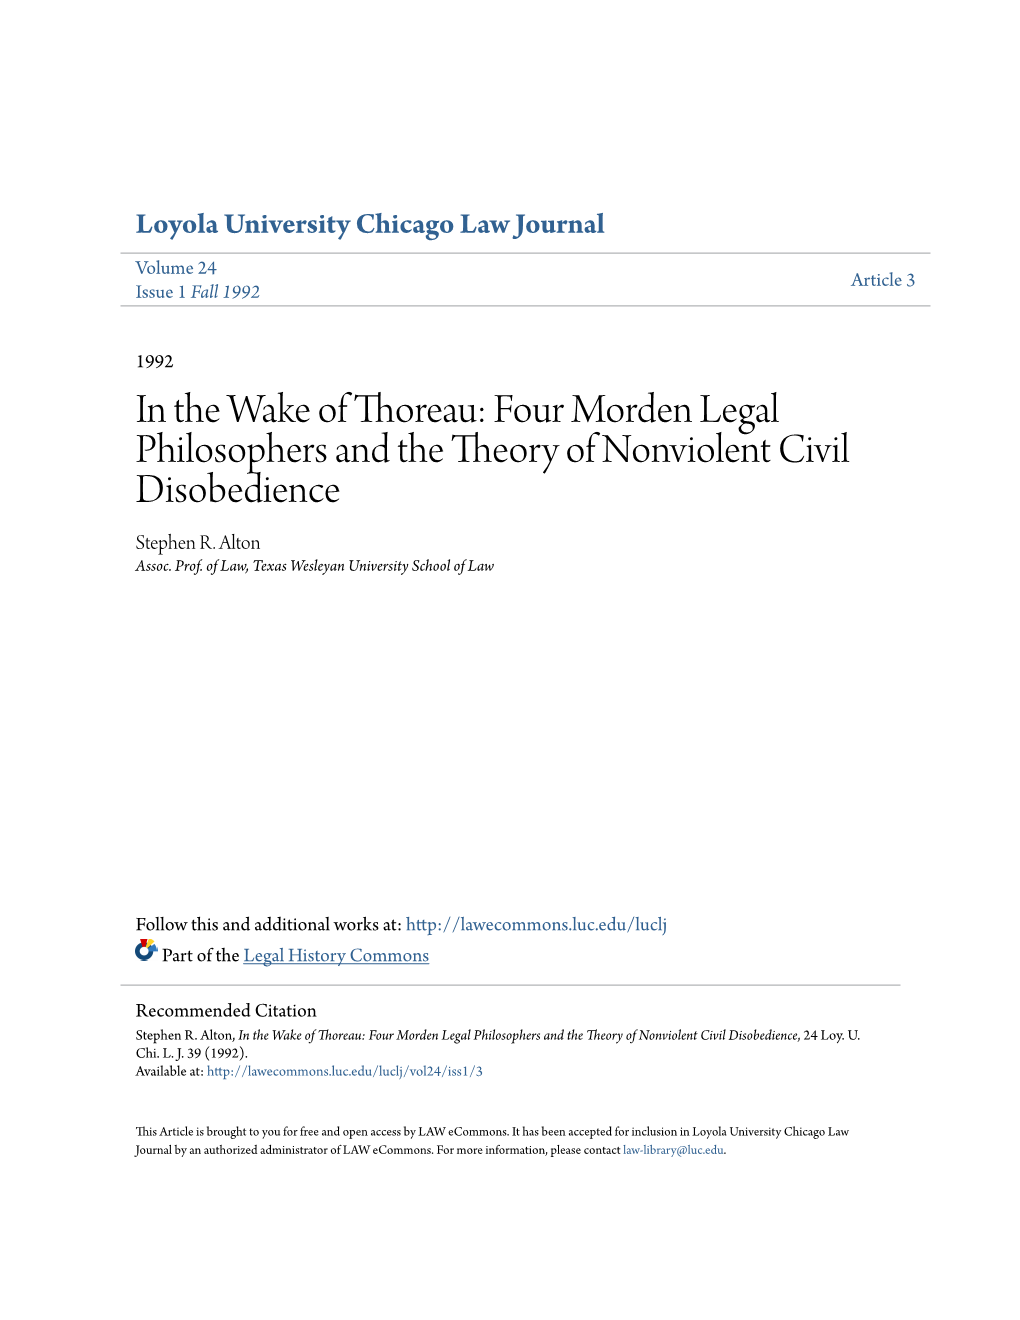 In the Wake of Thoreau: Four Morden Legal Philosophers and the Theory of Nonviolent Civil Disobedience Stephen R